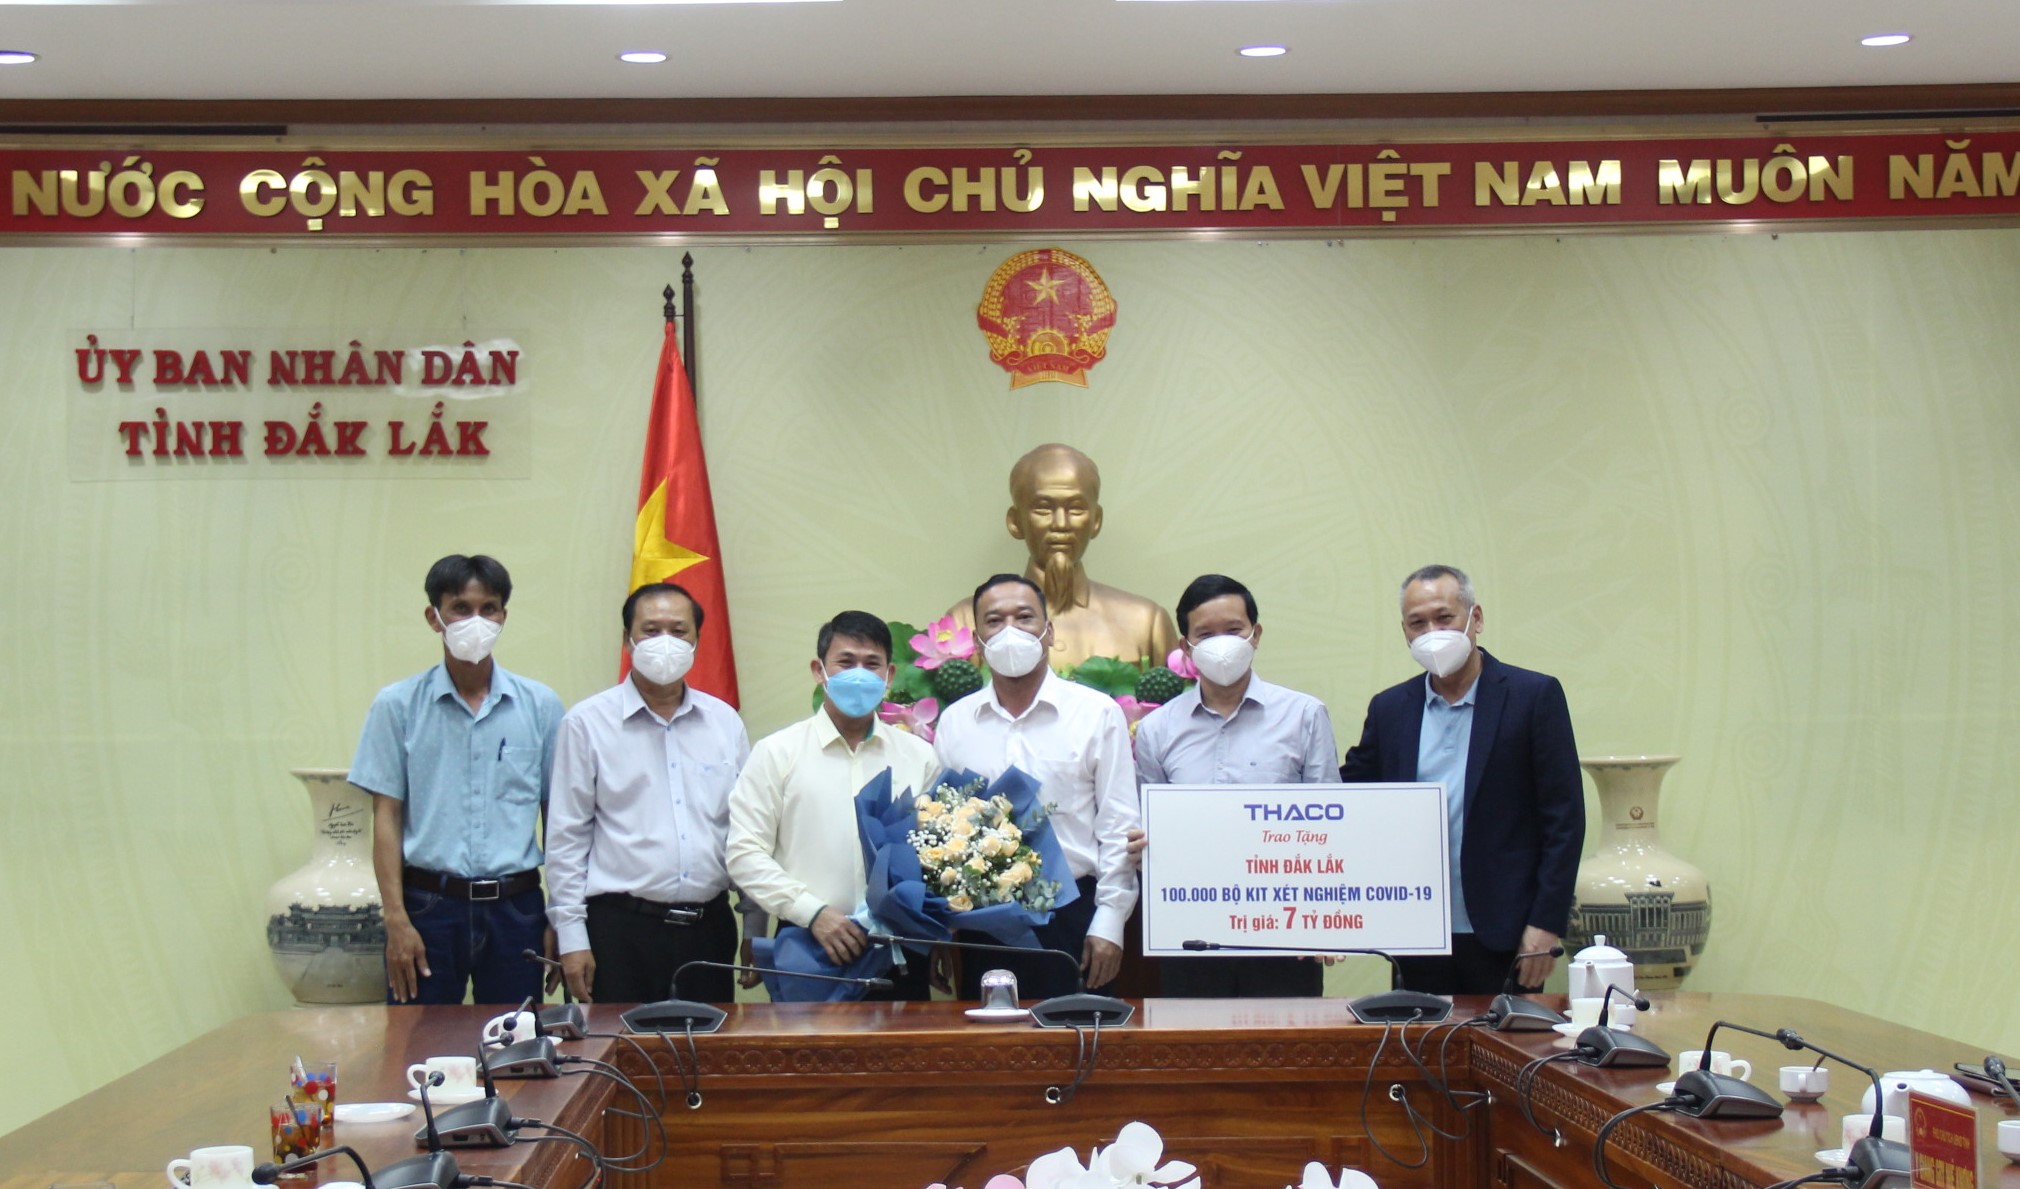 The People's Committee of Dak Lak Province receives medical supplies for COVID-19prevention and control